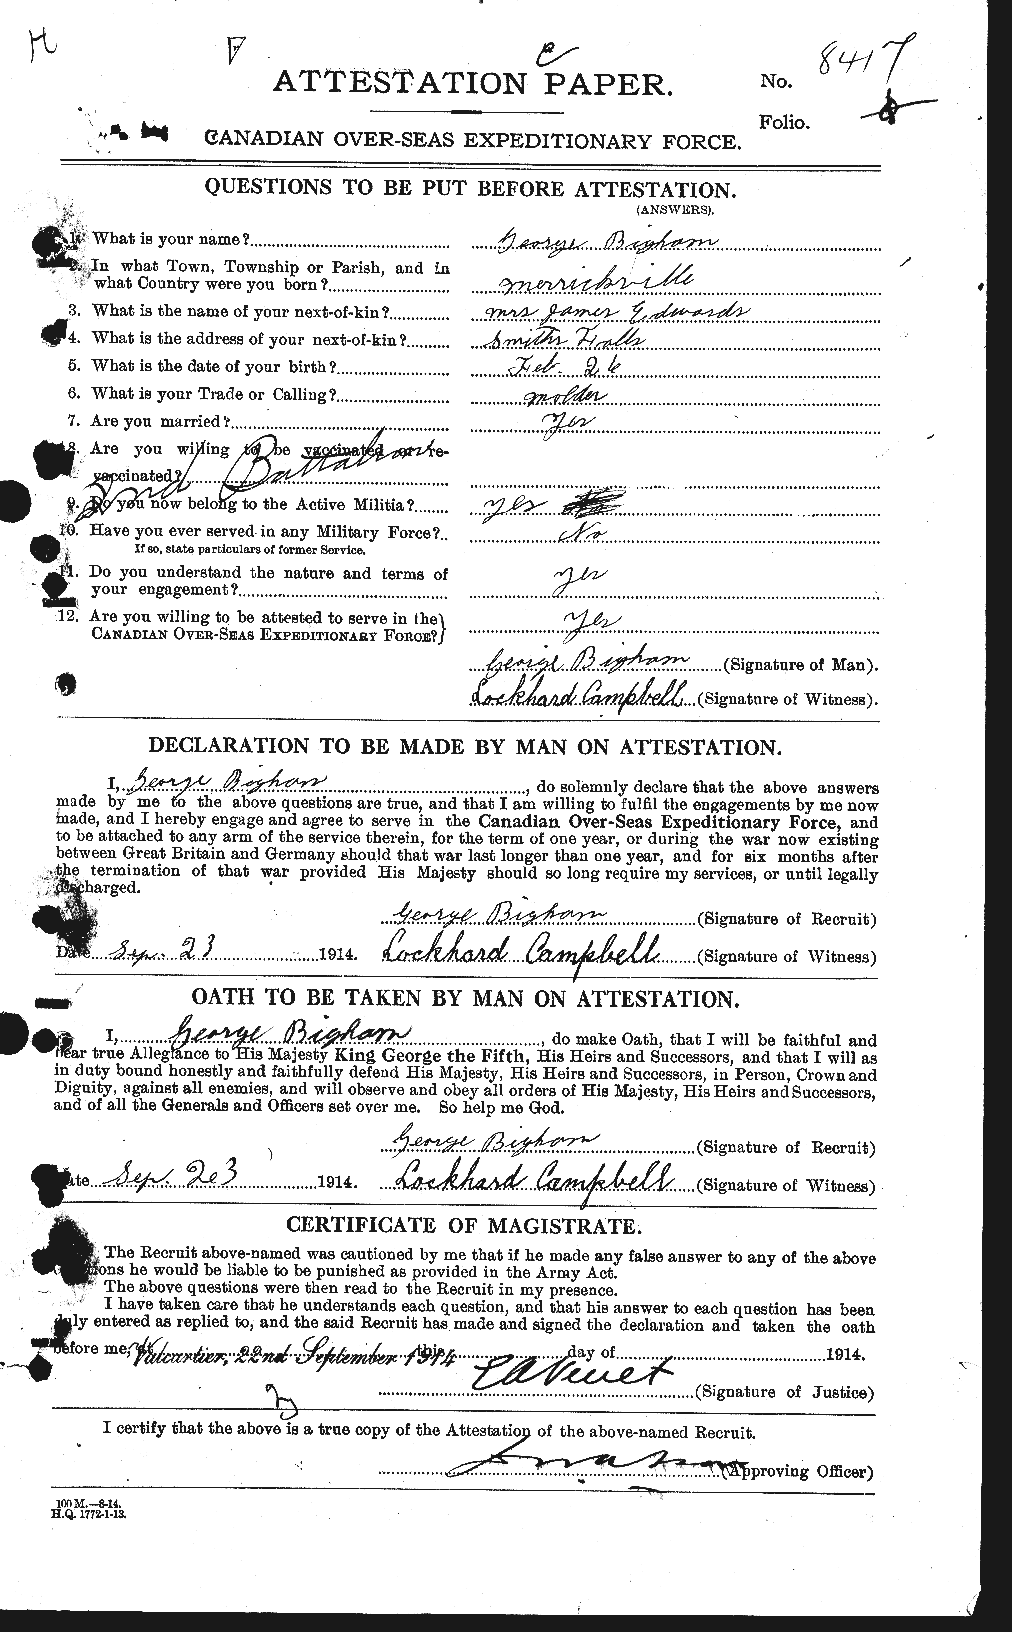 Personnel Records of the First World War - CEF 239141a